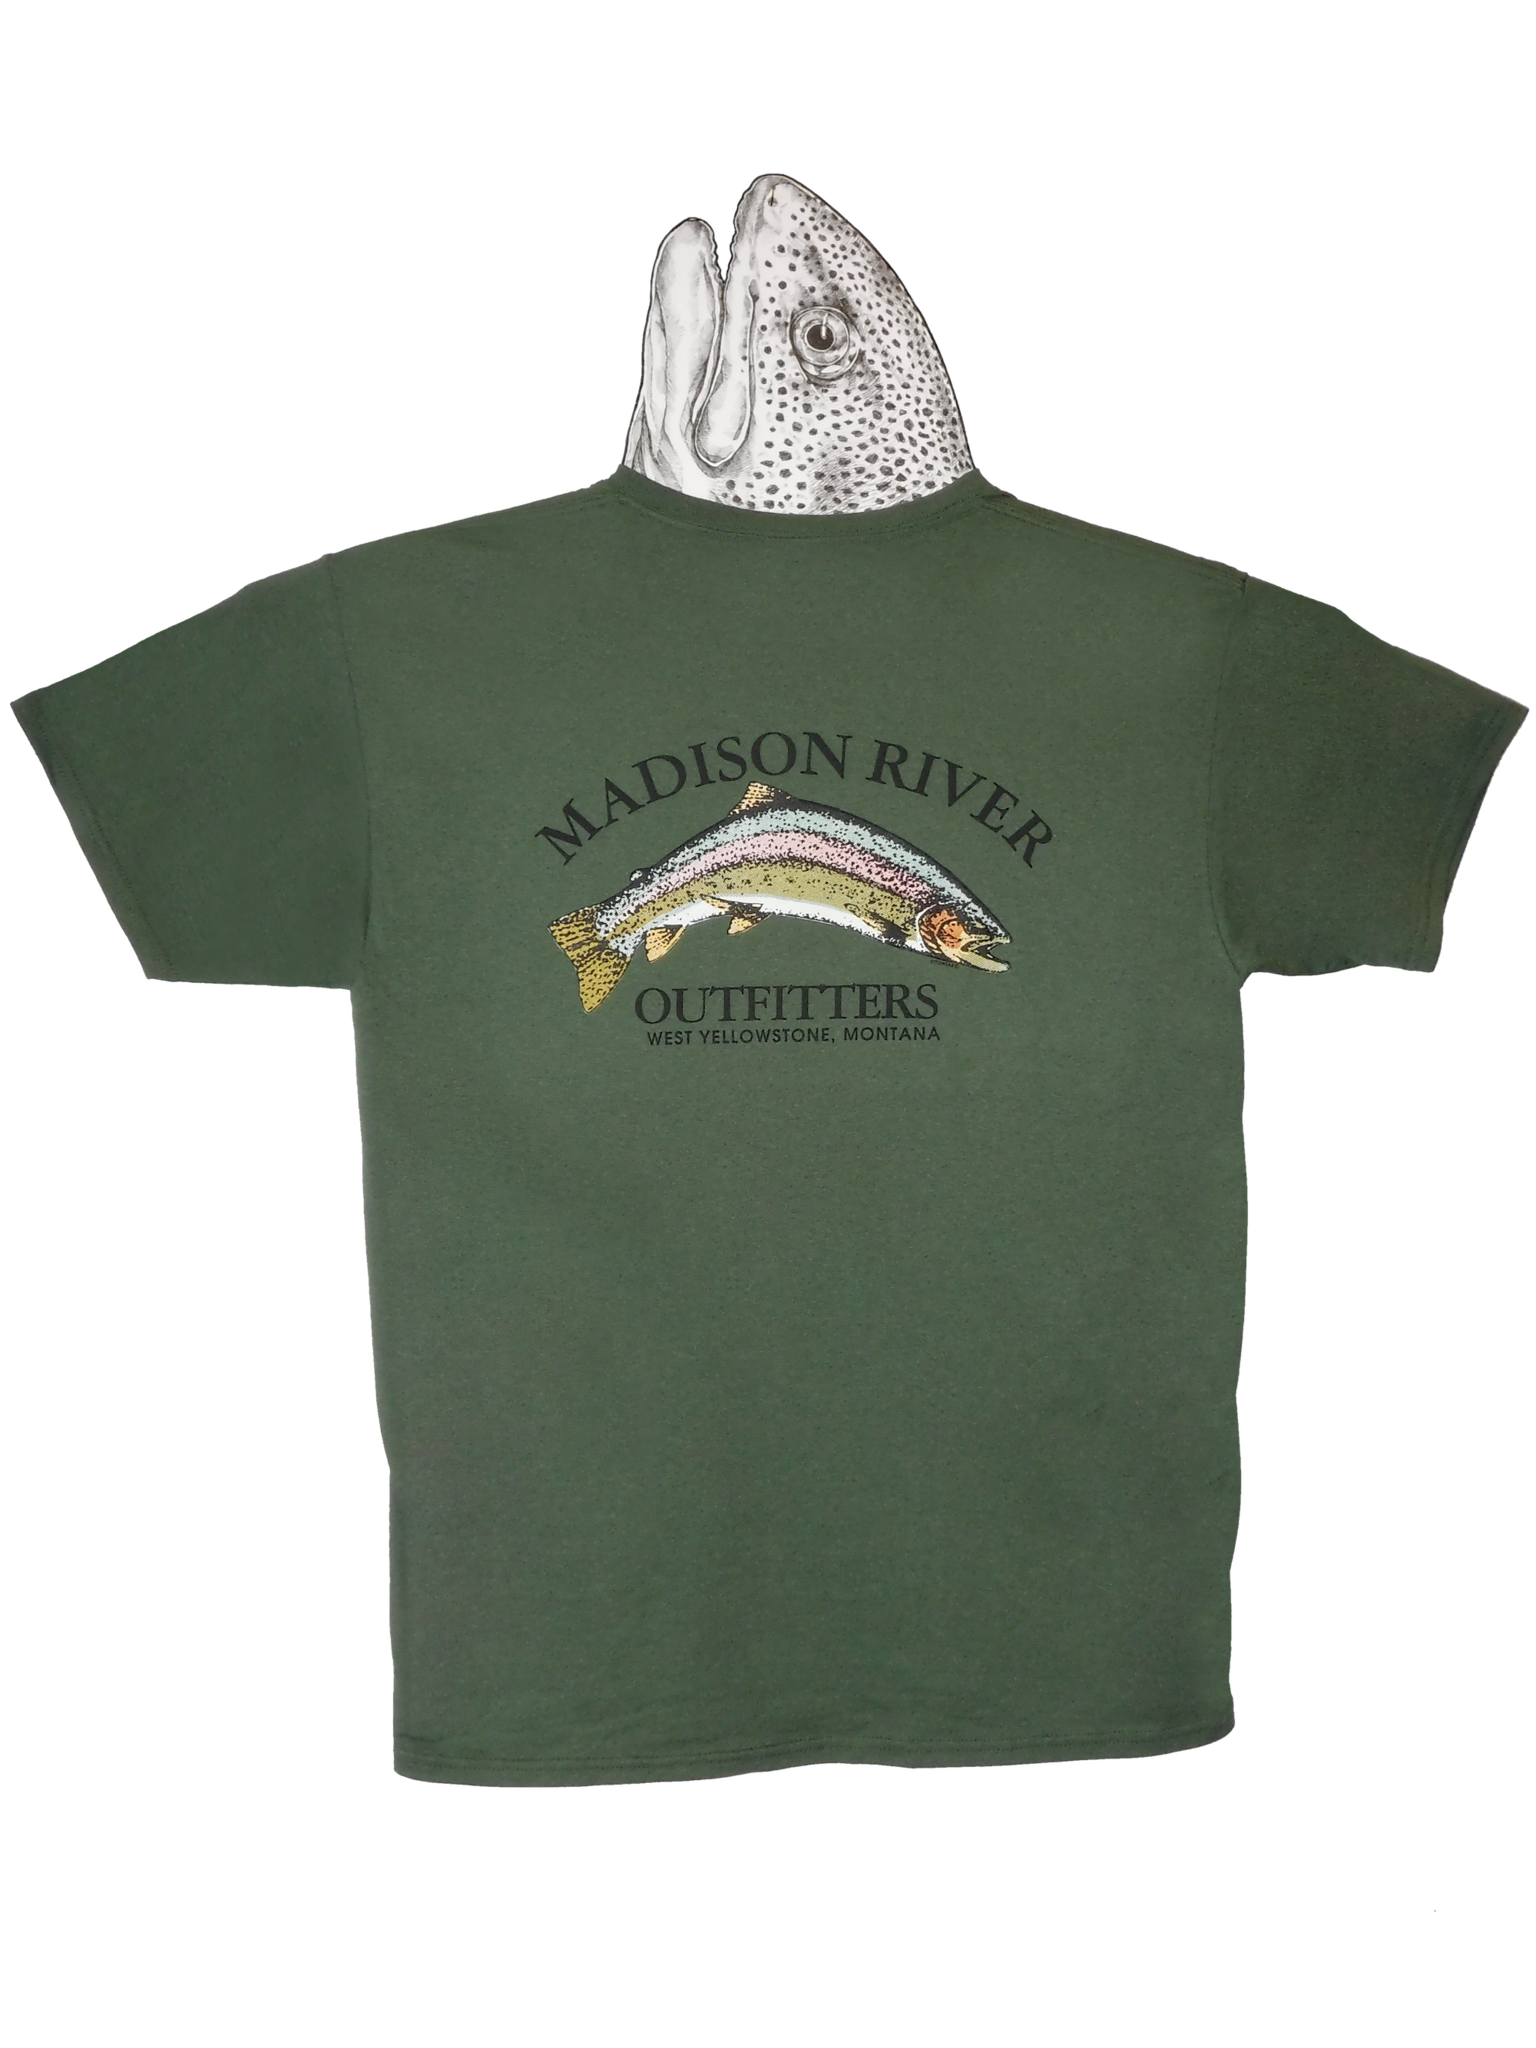 MRO Classic Logo Wear T-Shirt S/S - Madison River Outfitters